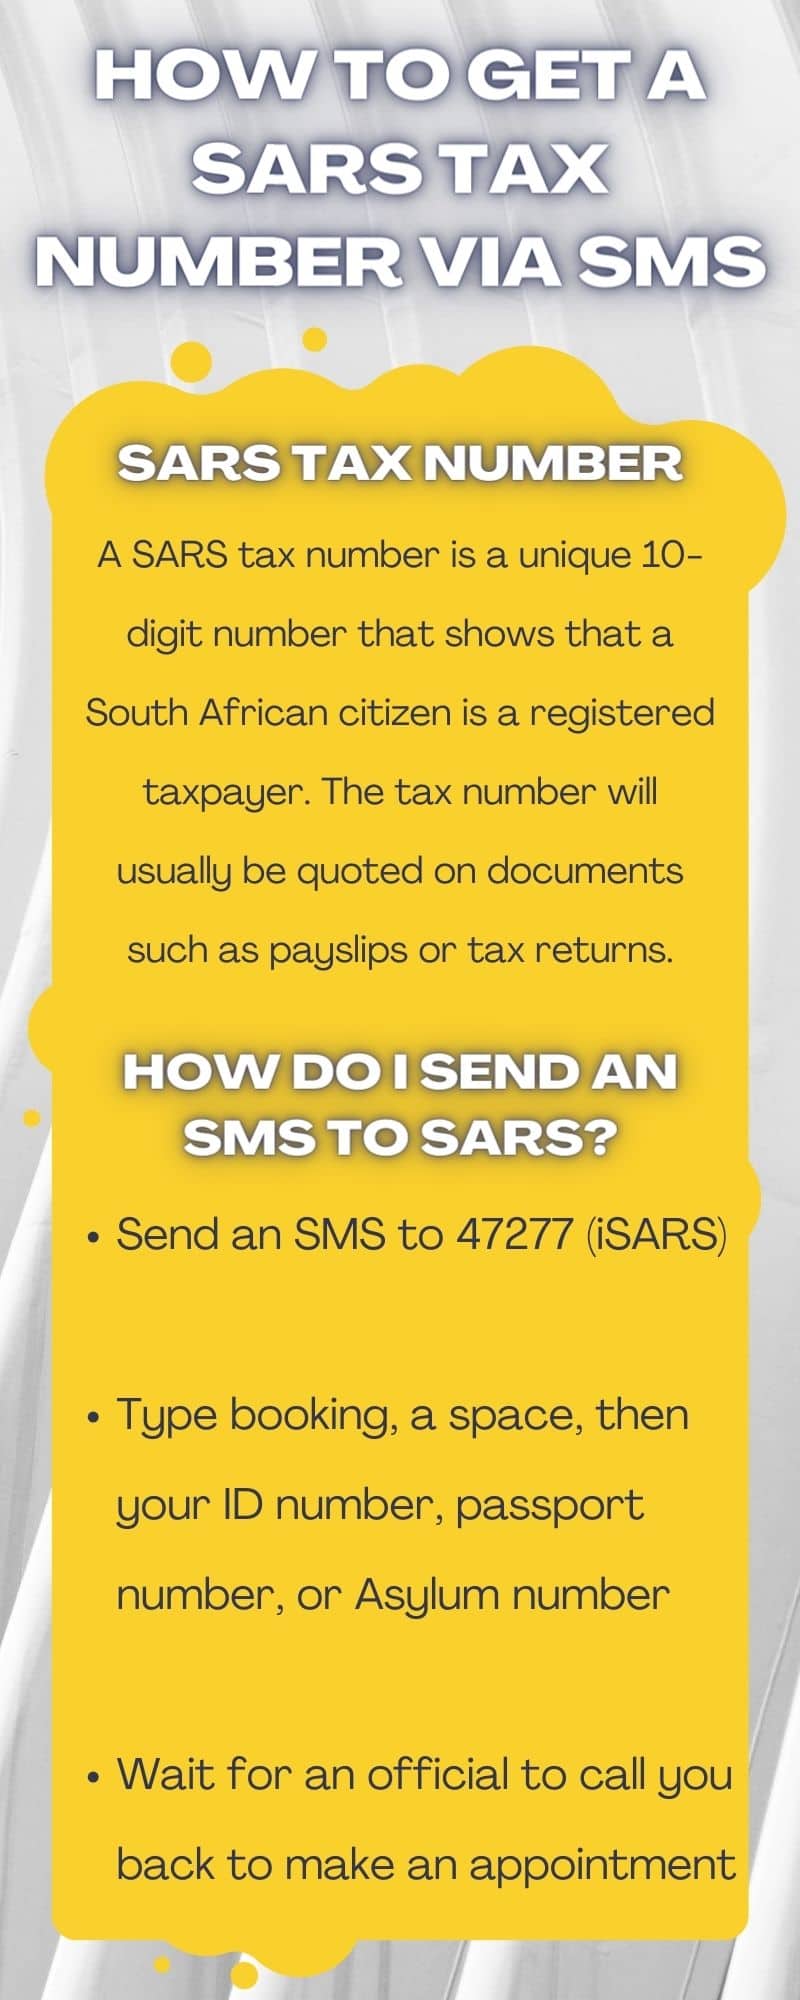 How to get a SARS tax number via SMS